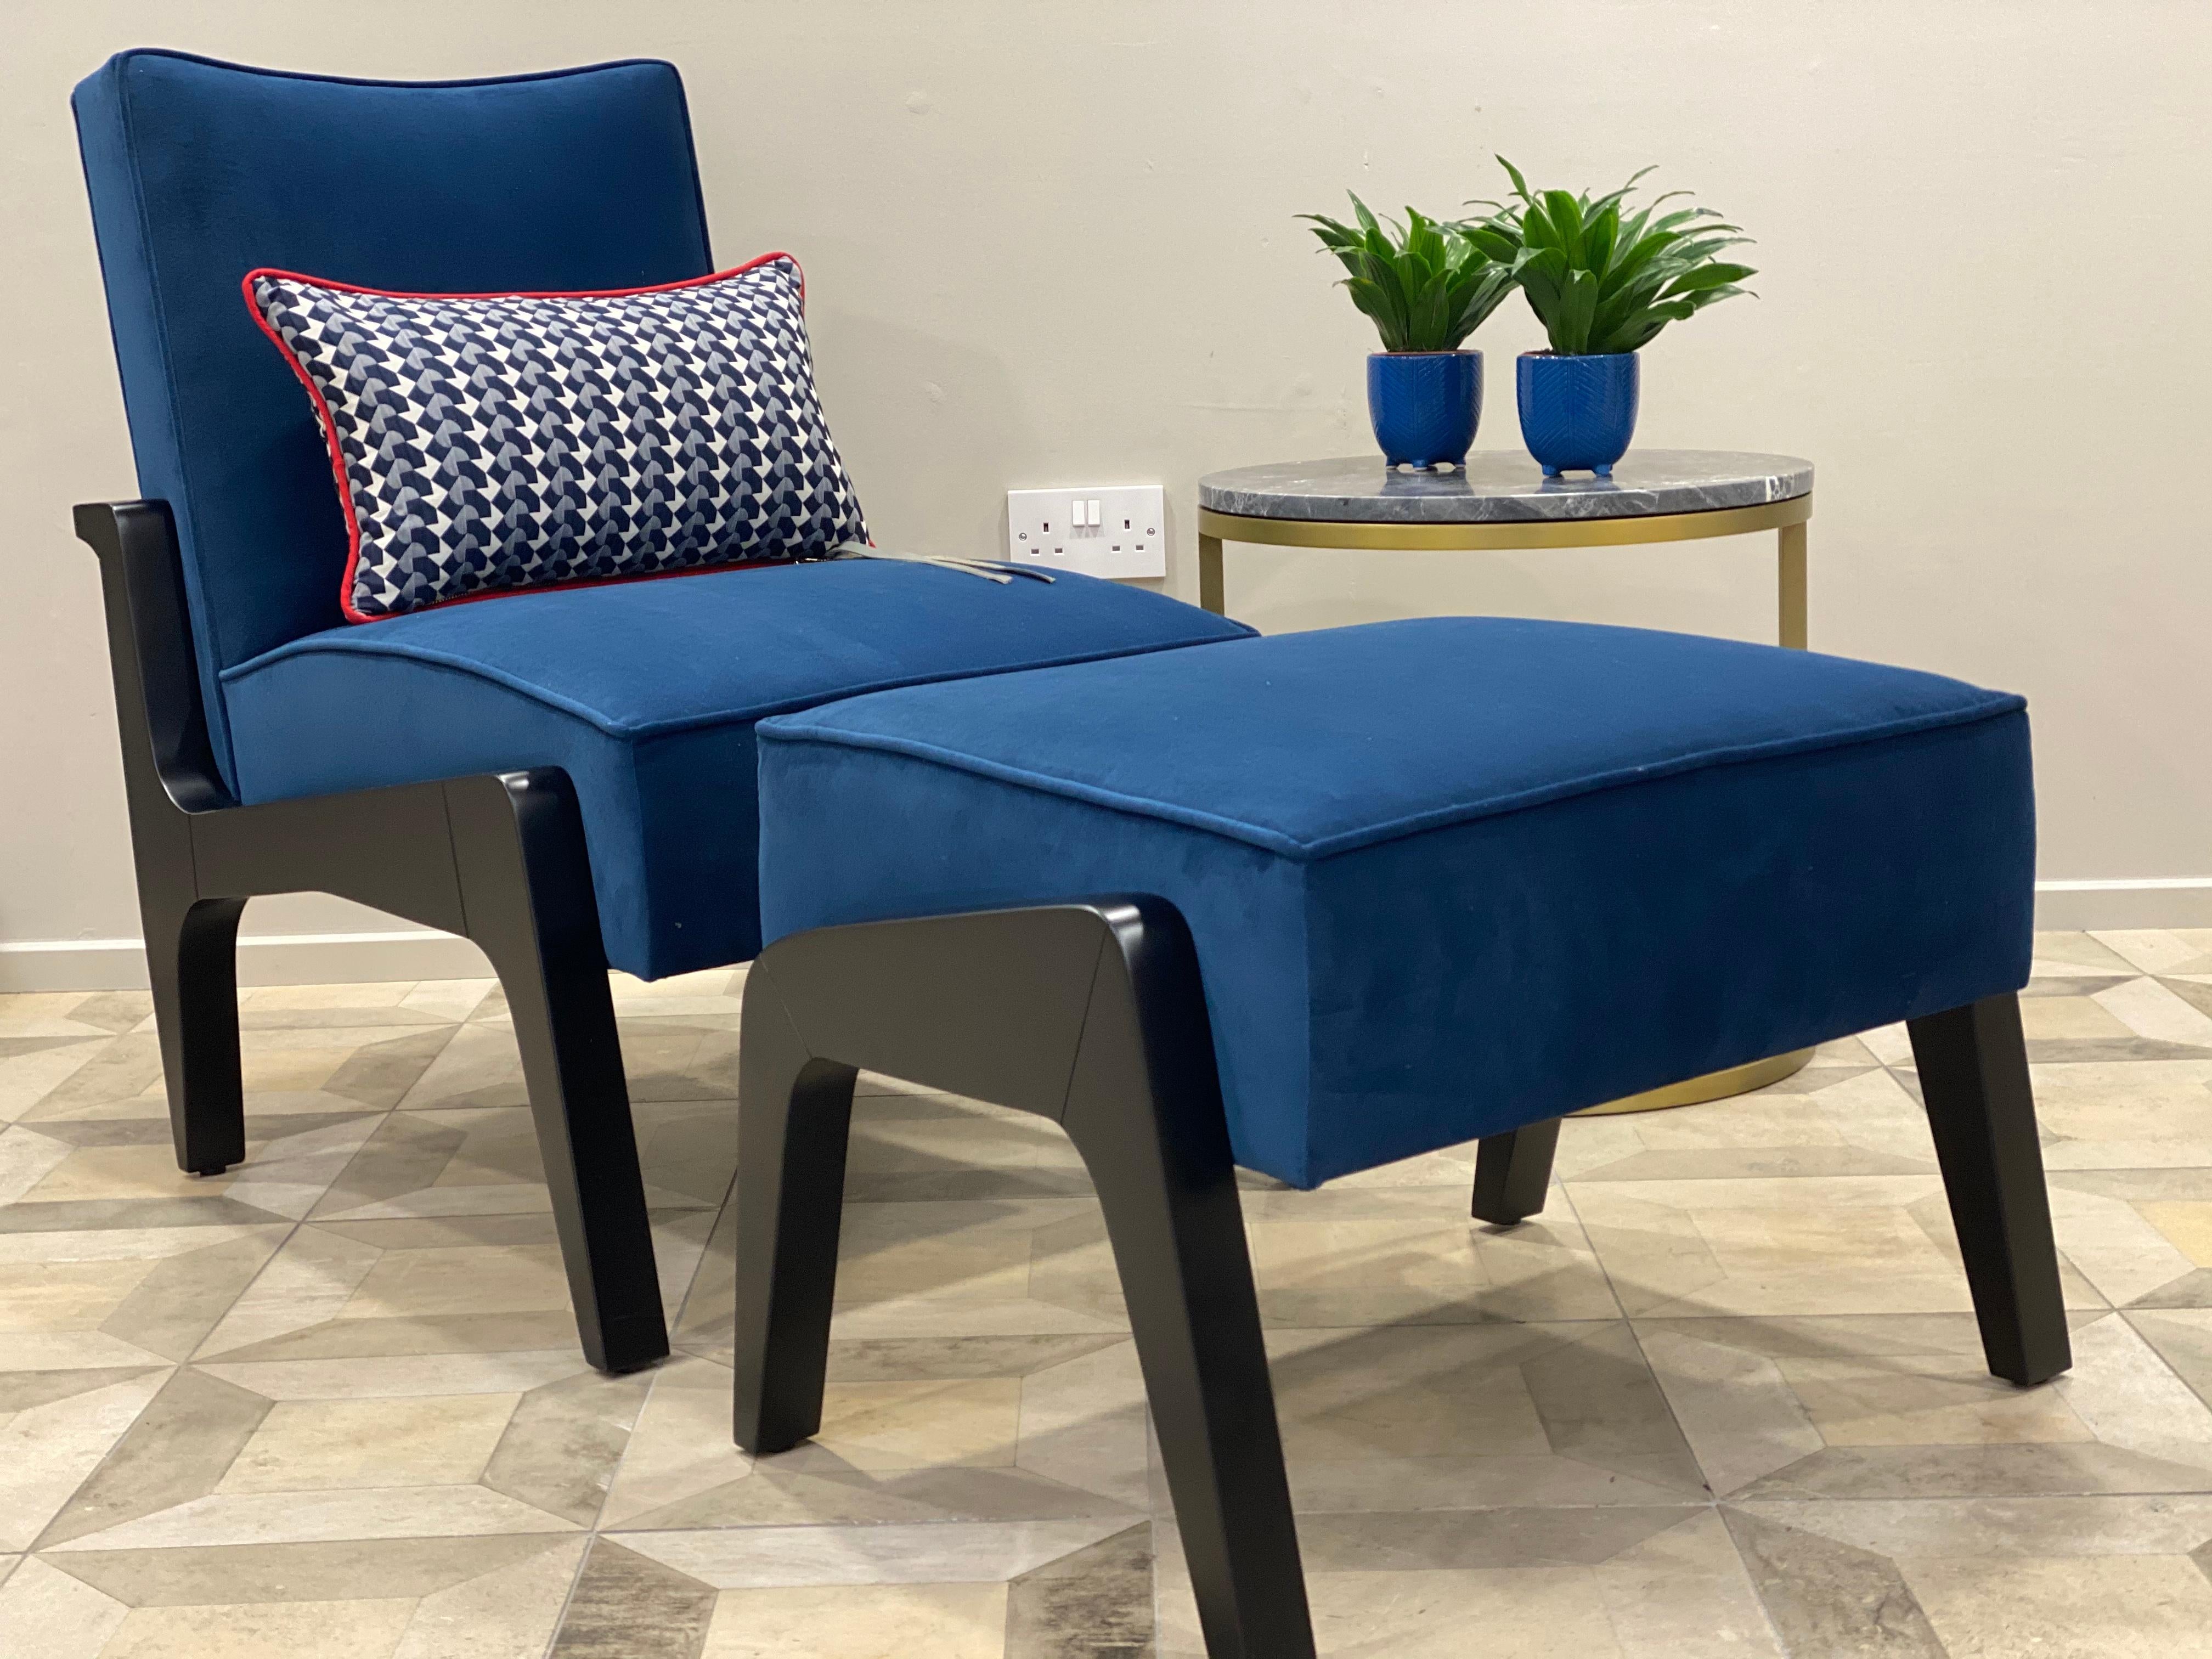 British Custom Made Atena Chair and Foot Stool, Black Ebony and Blue Notte Velvet For Sale